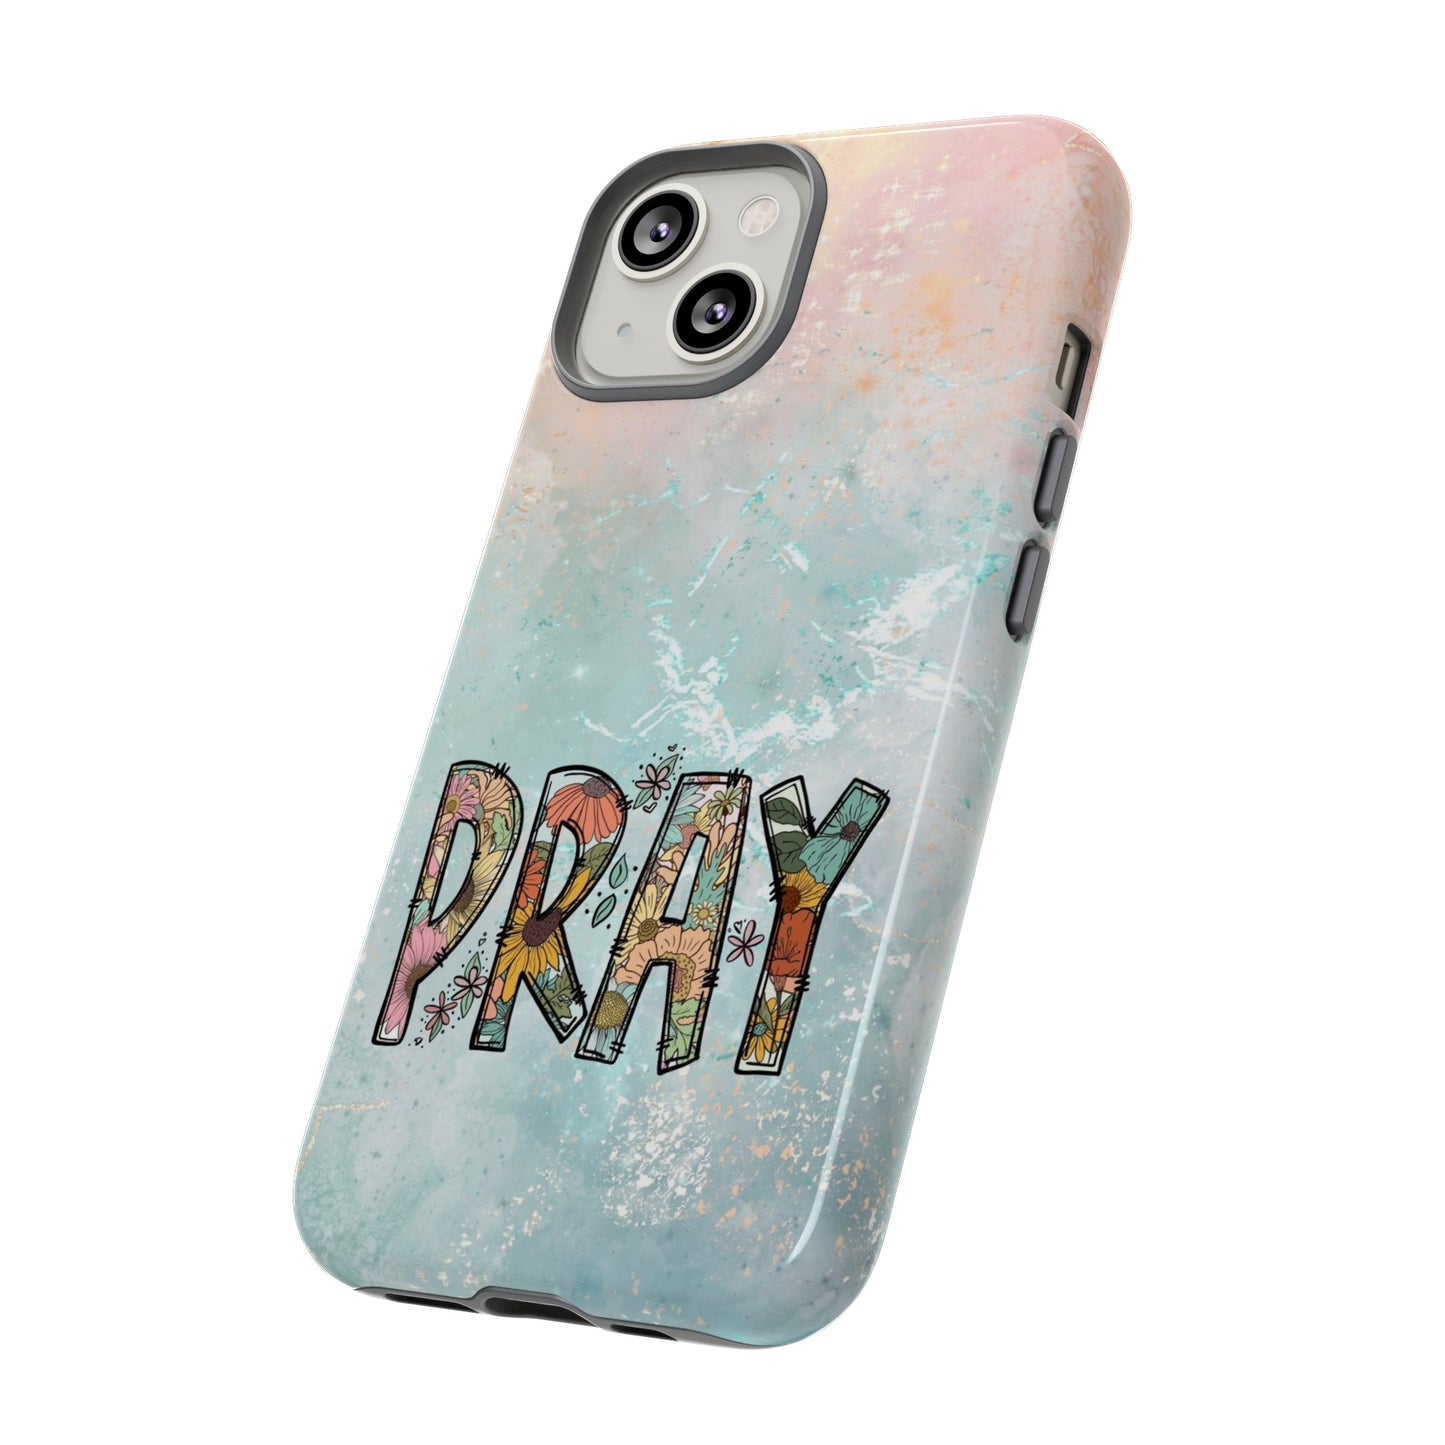 Floral PRAY iPhone Protective Cases